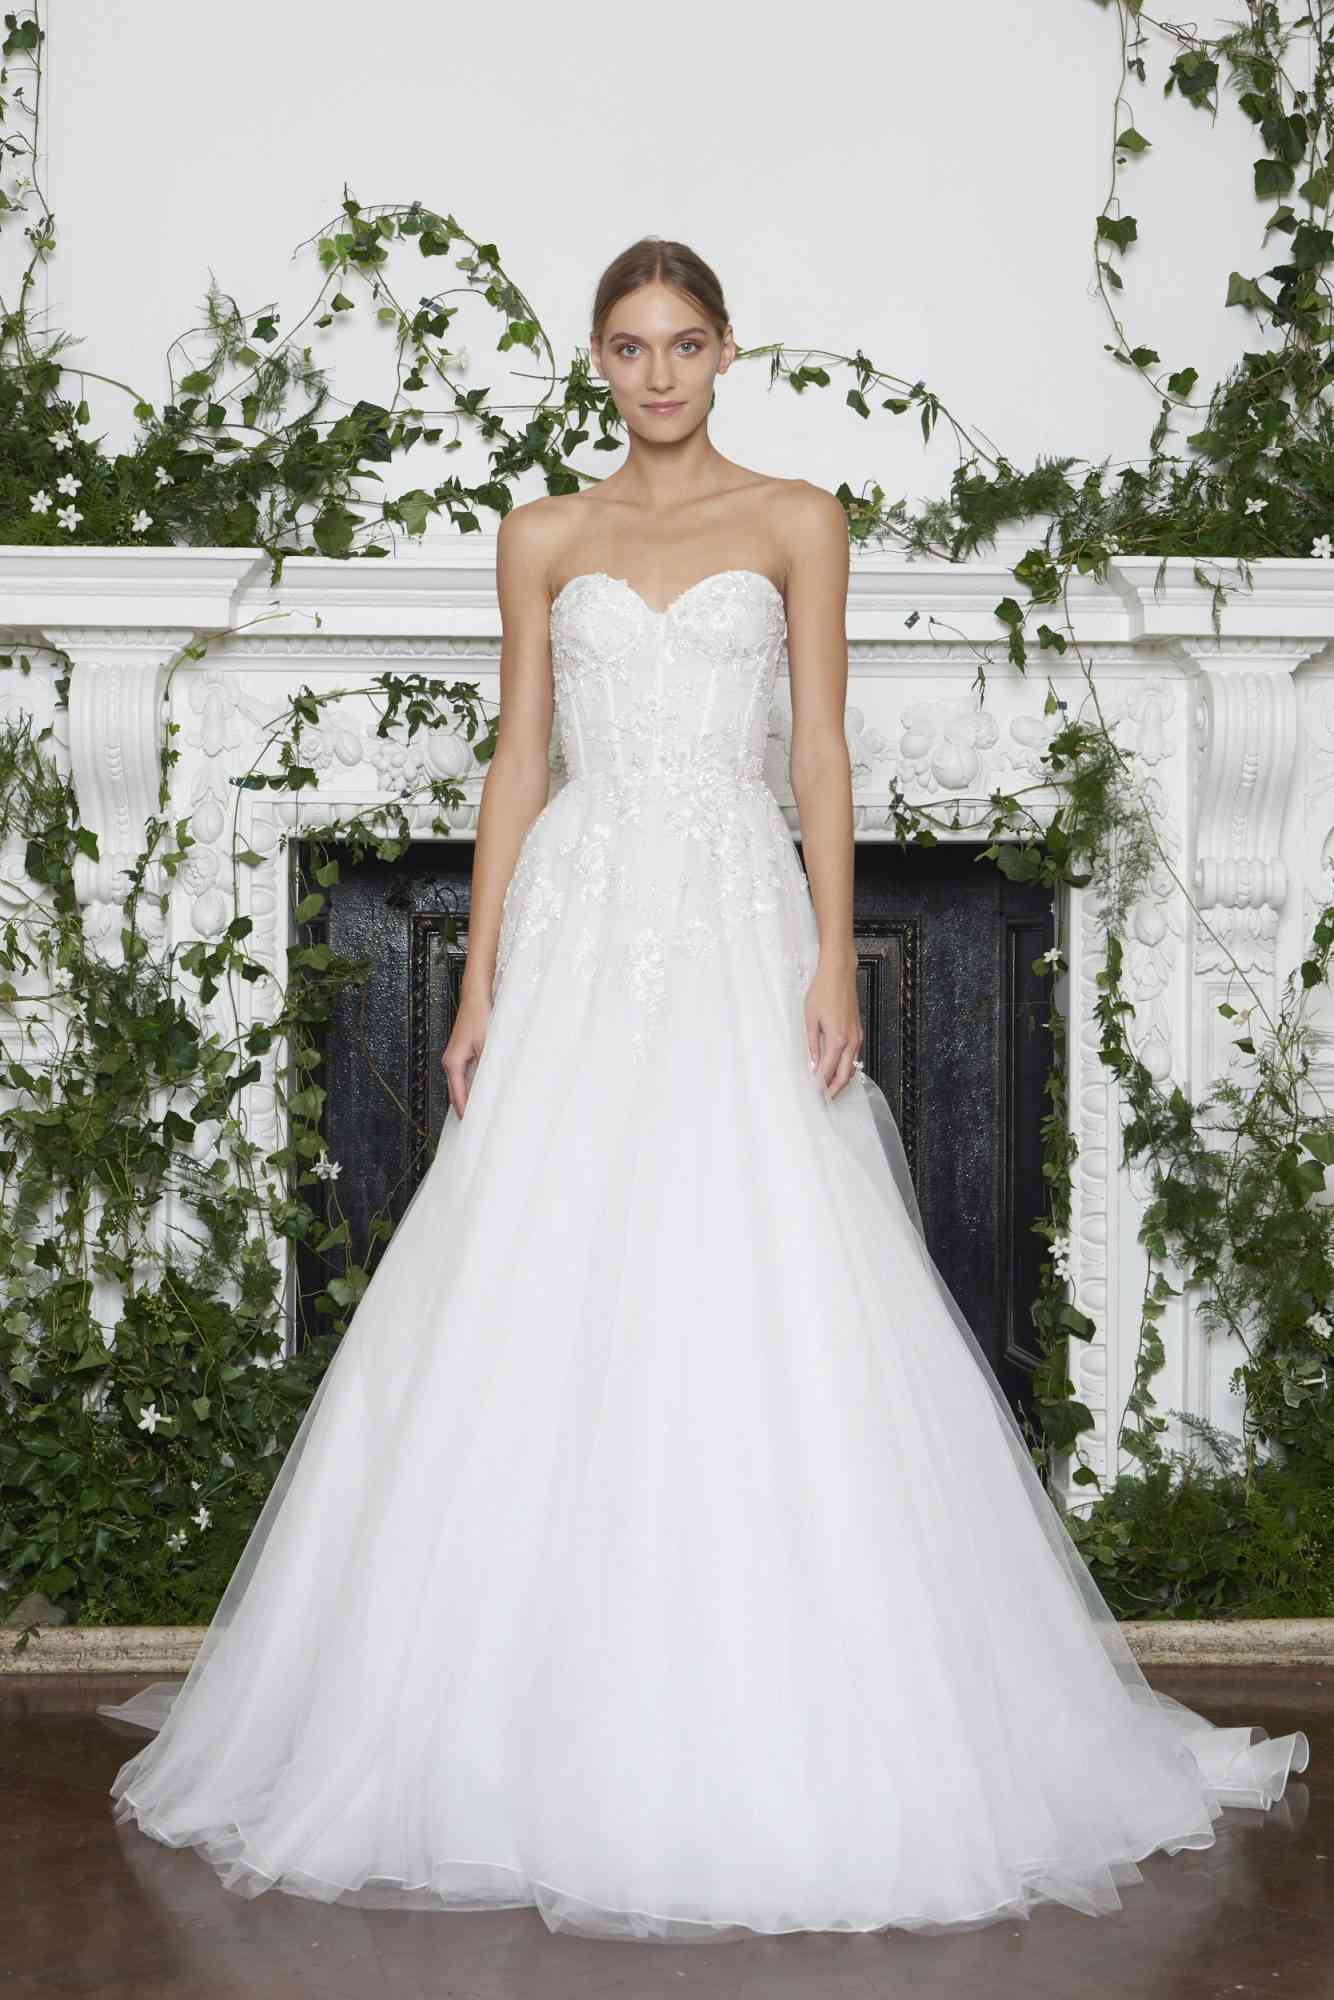 Monique Lhuillier Fall 2018 Strapless Lace Ball Gown with Exposed Boning